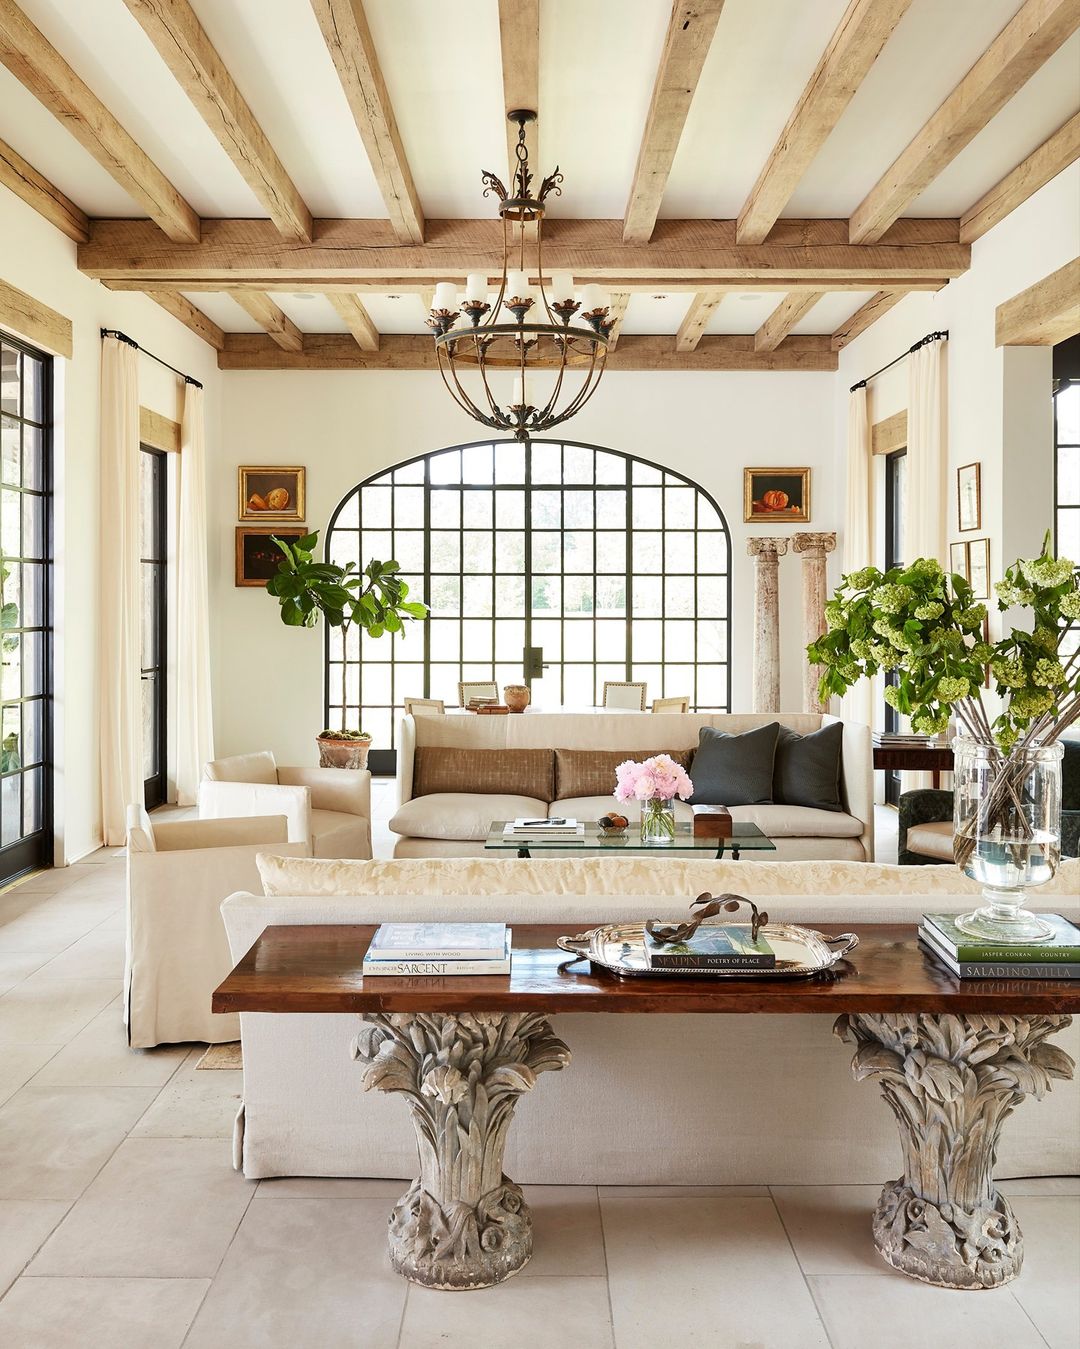 Décor Inspiration: 18 Beautiful Rooms for the Beginning of March